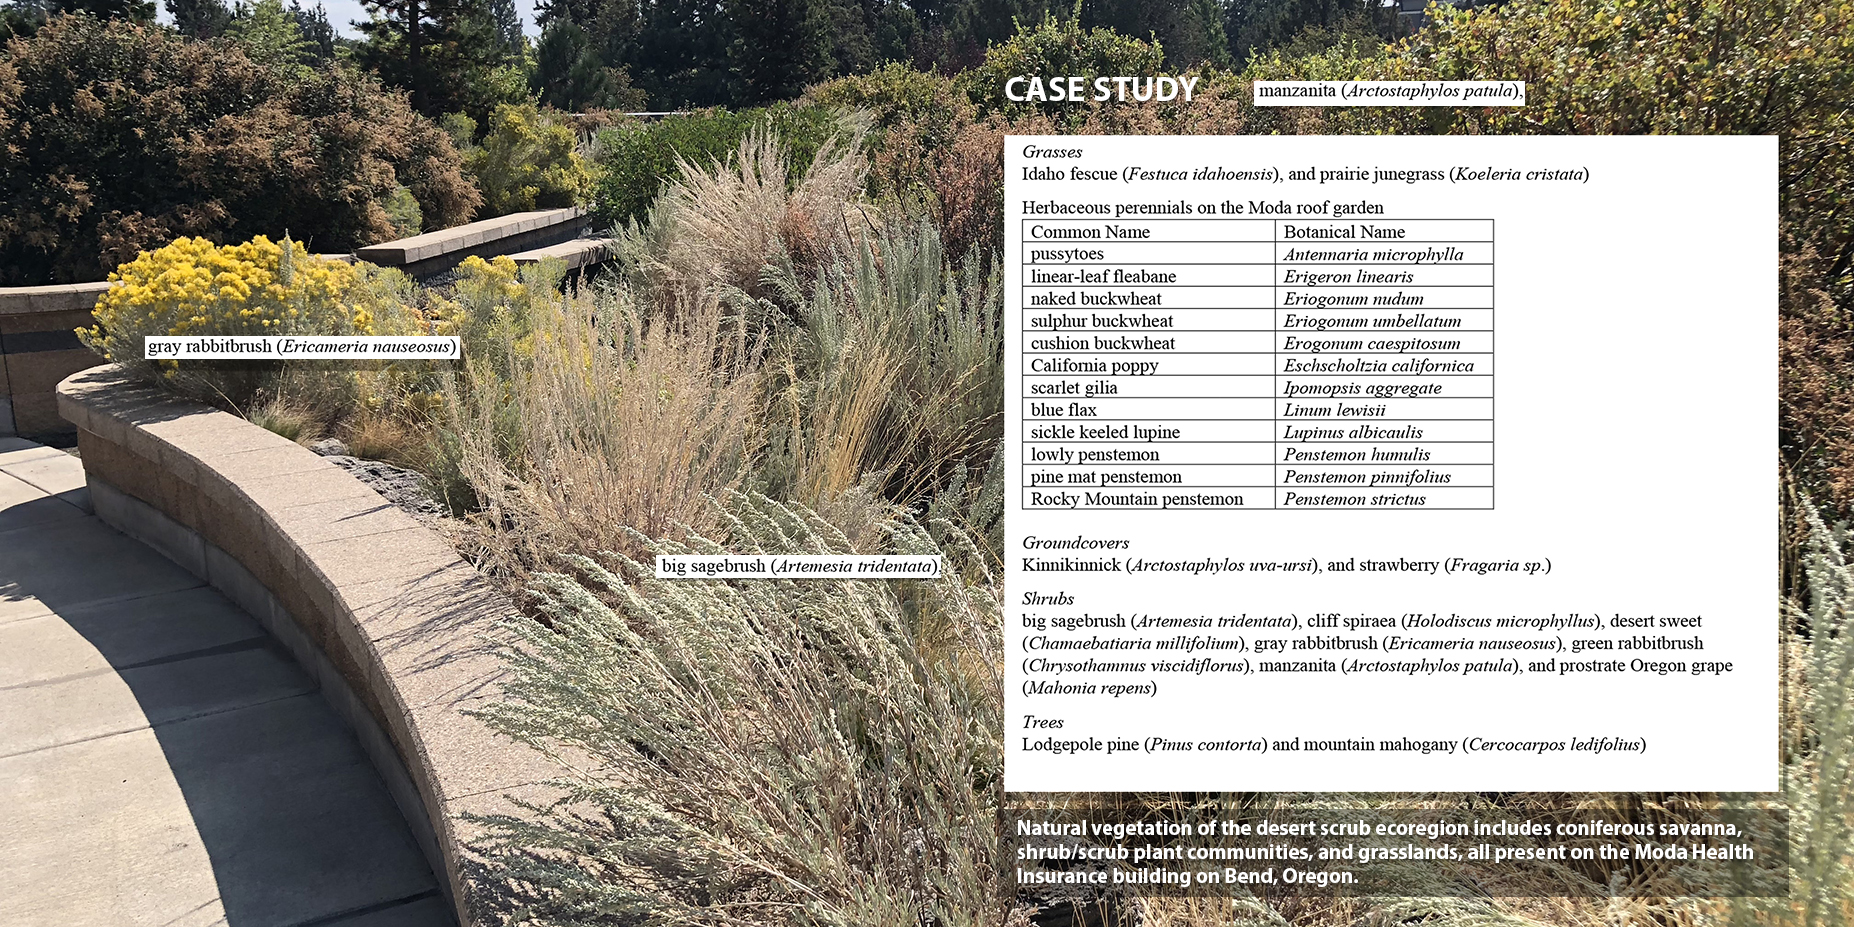 One of 10 Green Roofs Studied in the Intermontane Semi-arid Grassland Ecoregions (Chapter 6)